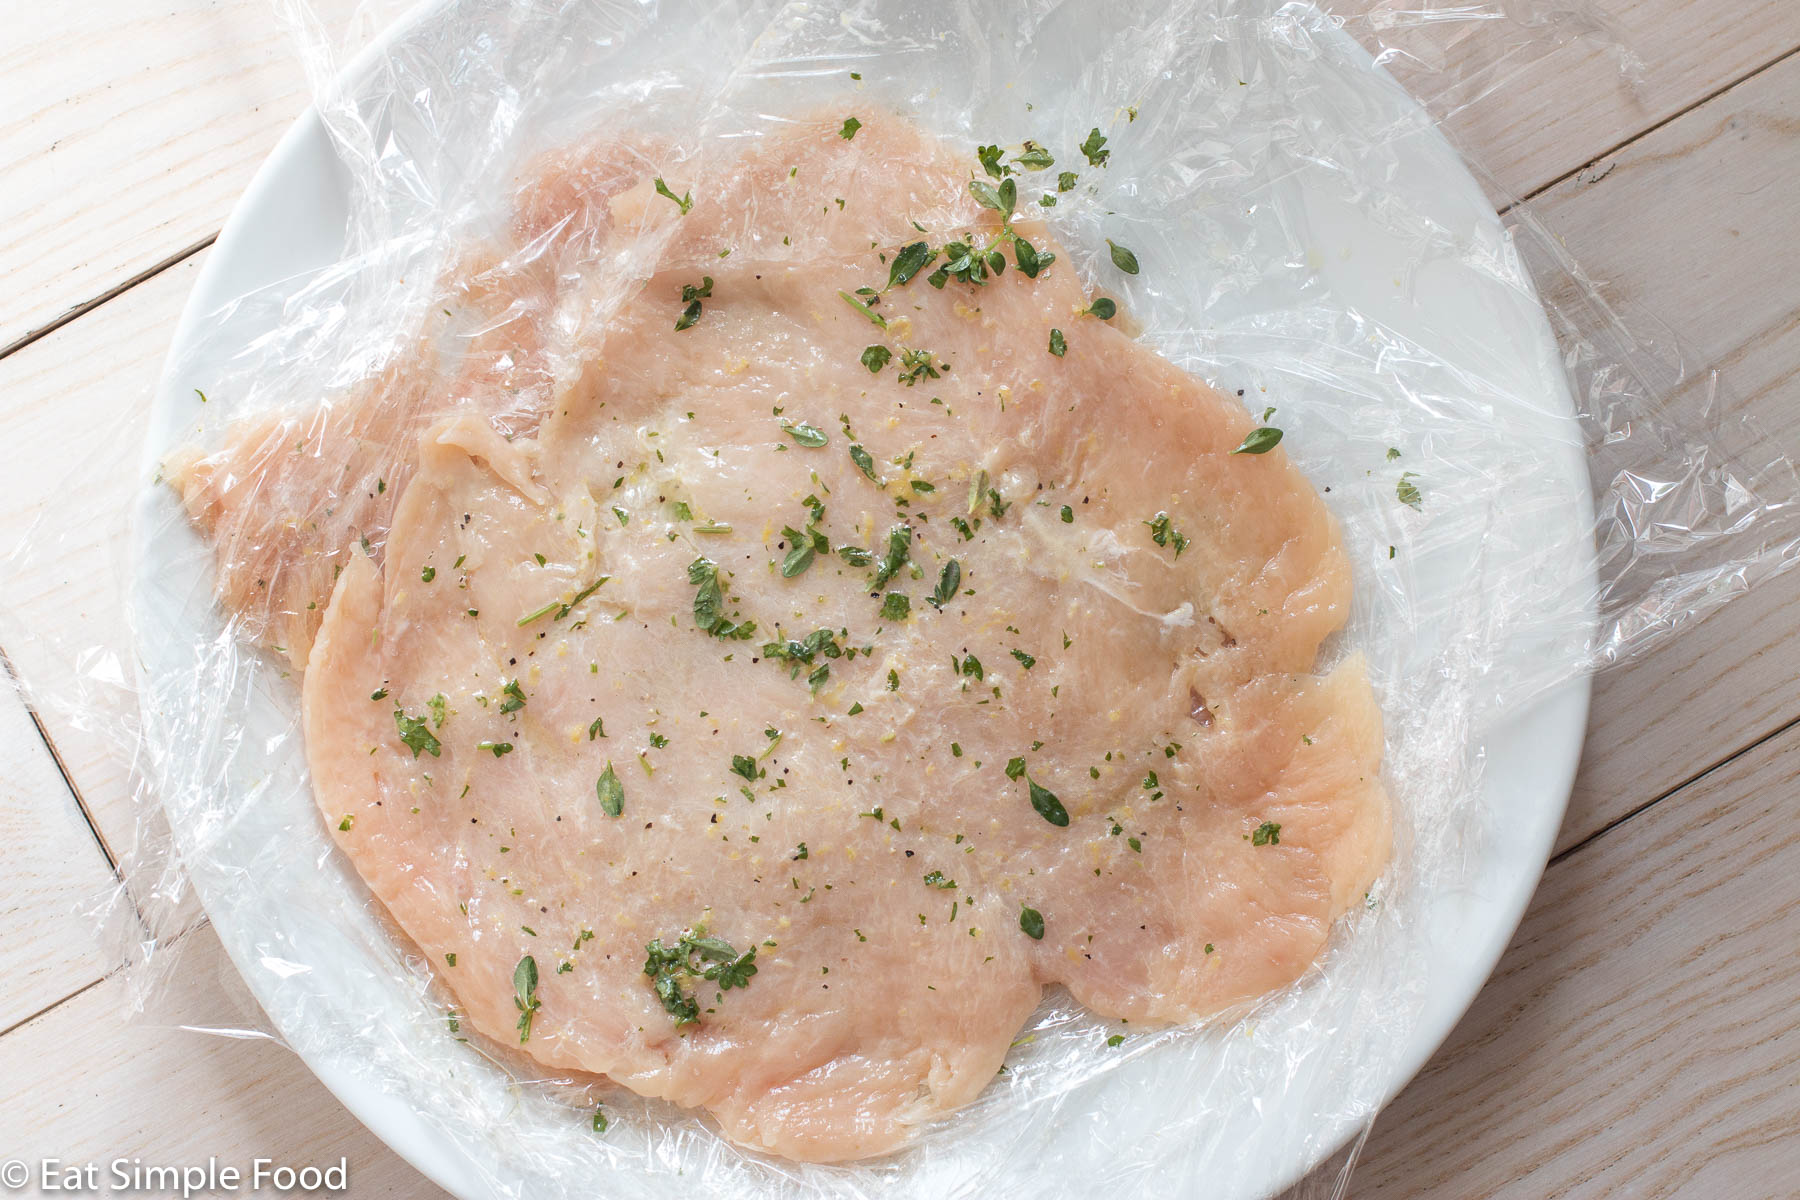 Flattened pieces of chicken stacked on a white plate with saran wrap in between each piece of chicken. Lemon zest, olive oil, and fresh herbs sprinkled on top.